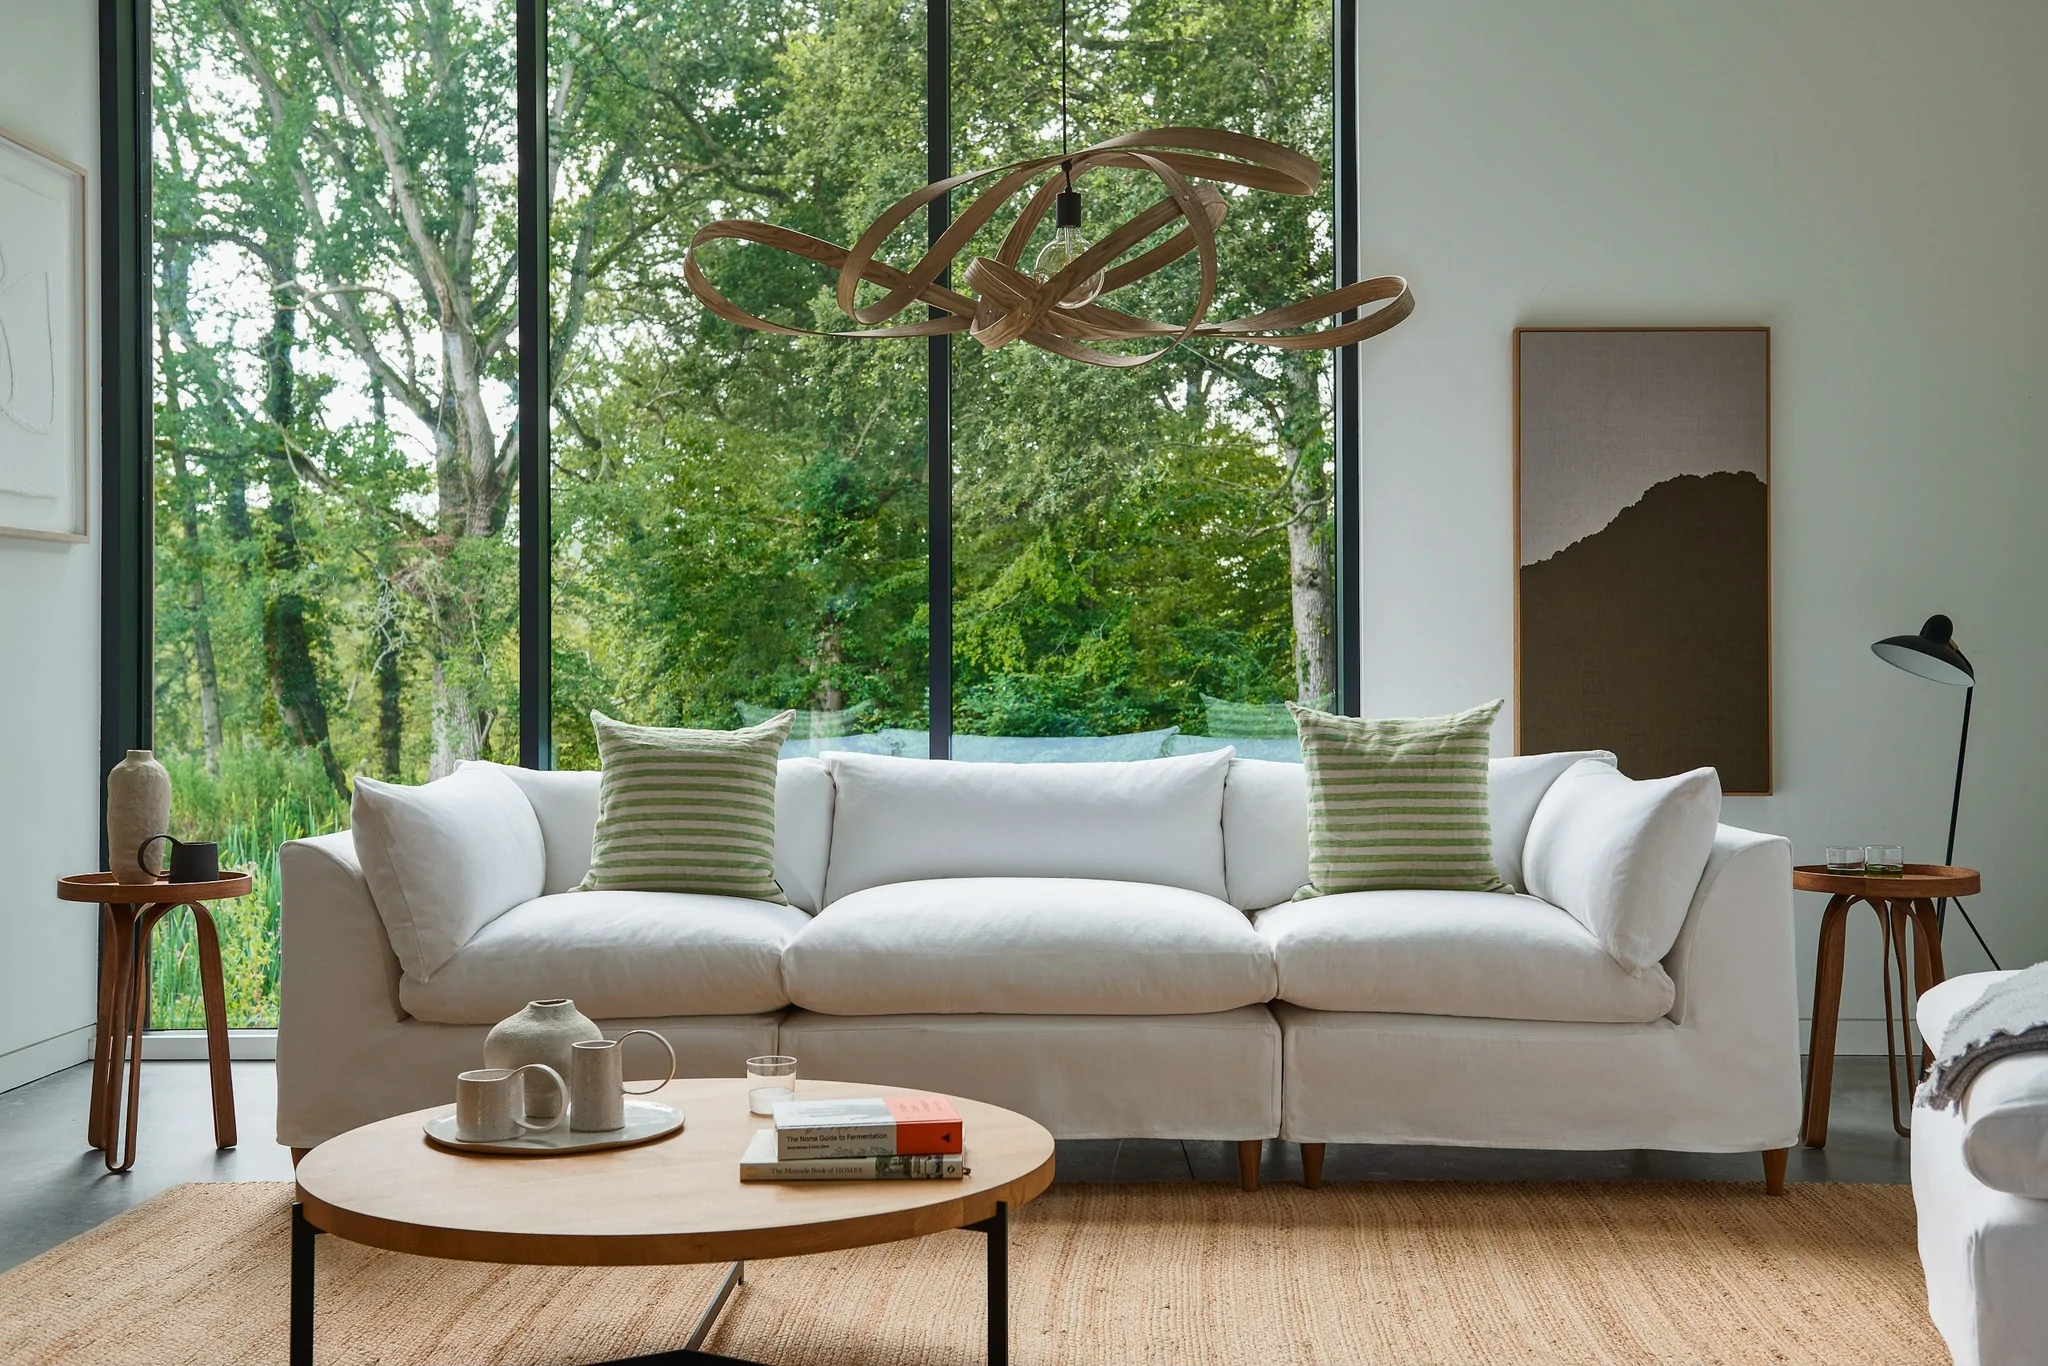 Orlando modular large sofa in a modern living room setting by Maker and Son